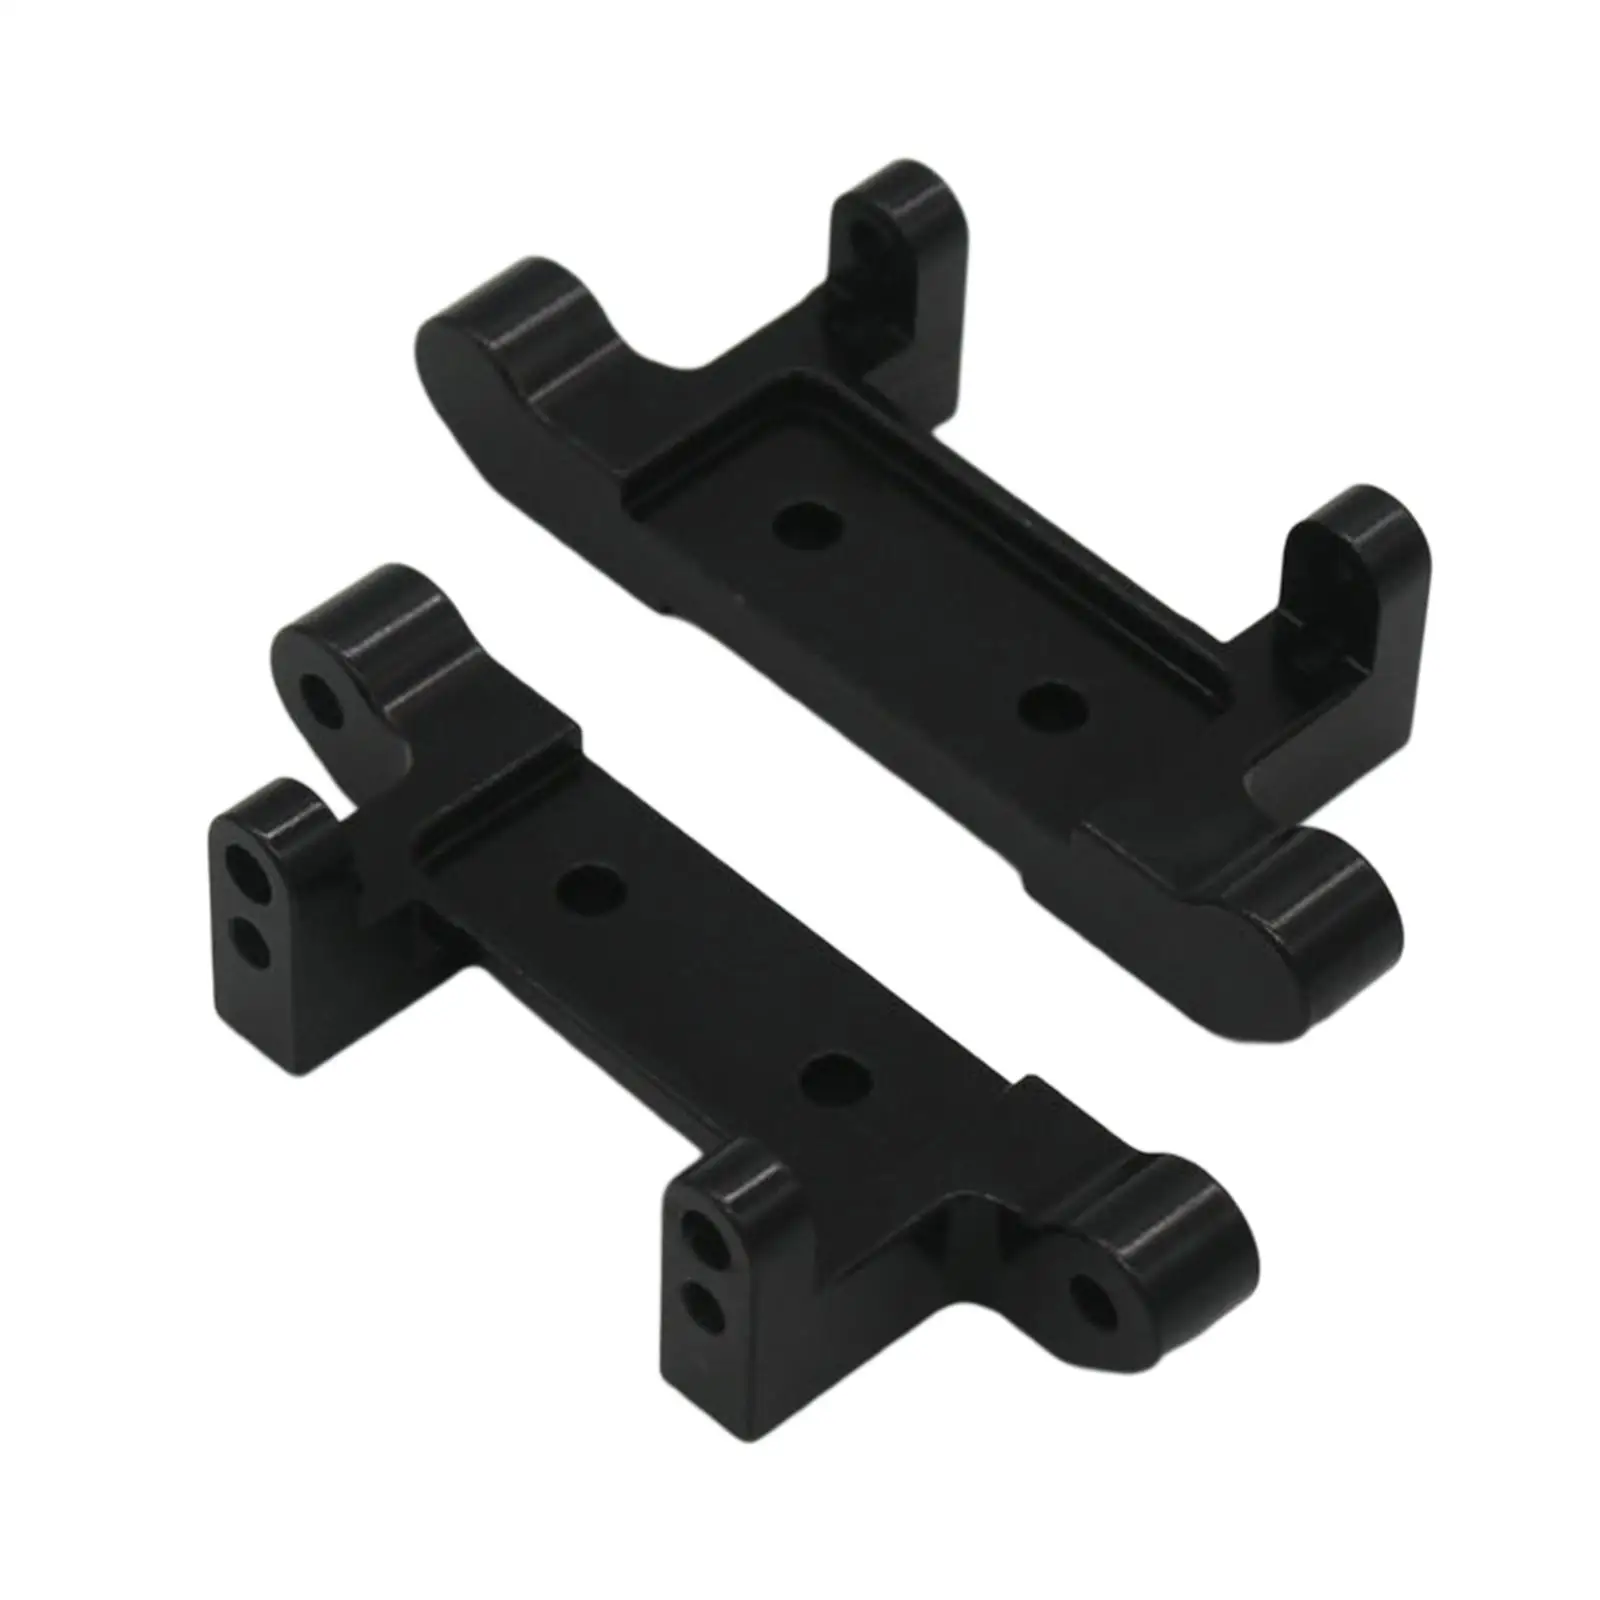 Upper Arm Mount, Metal Upper Arms Brackets for JLB Racing Cheetah 1:10 Monster Truck RC Model Car Replacement Upgrades Parts